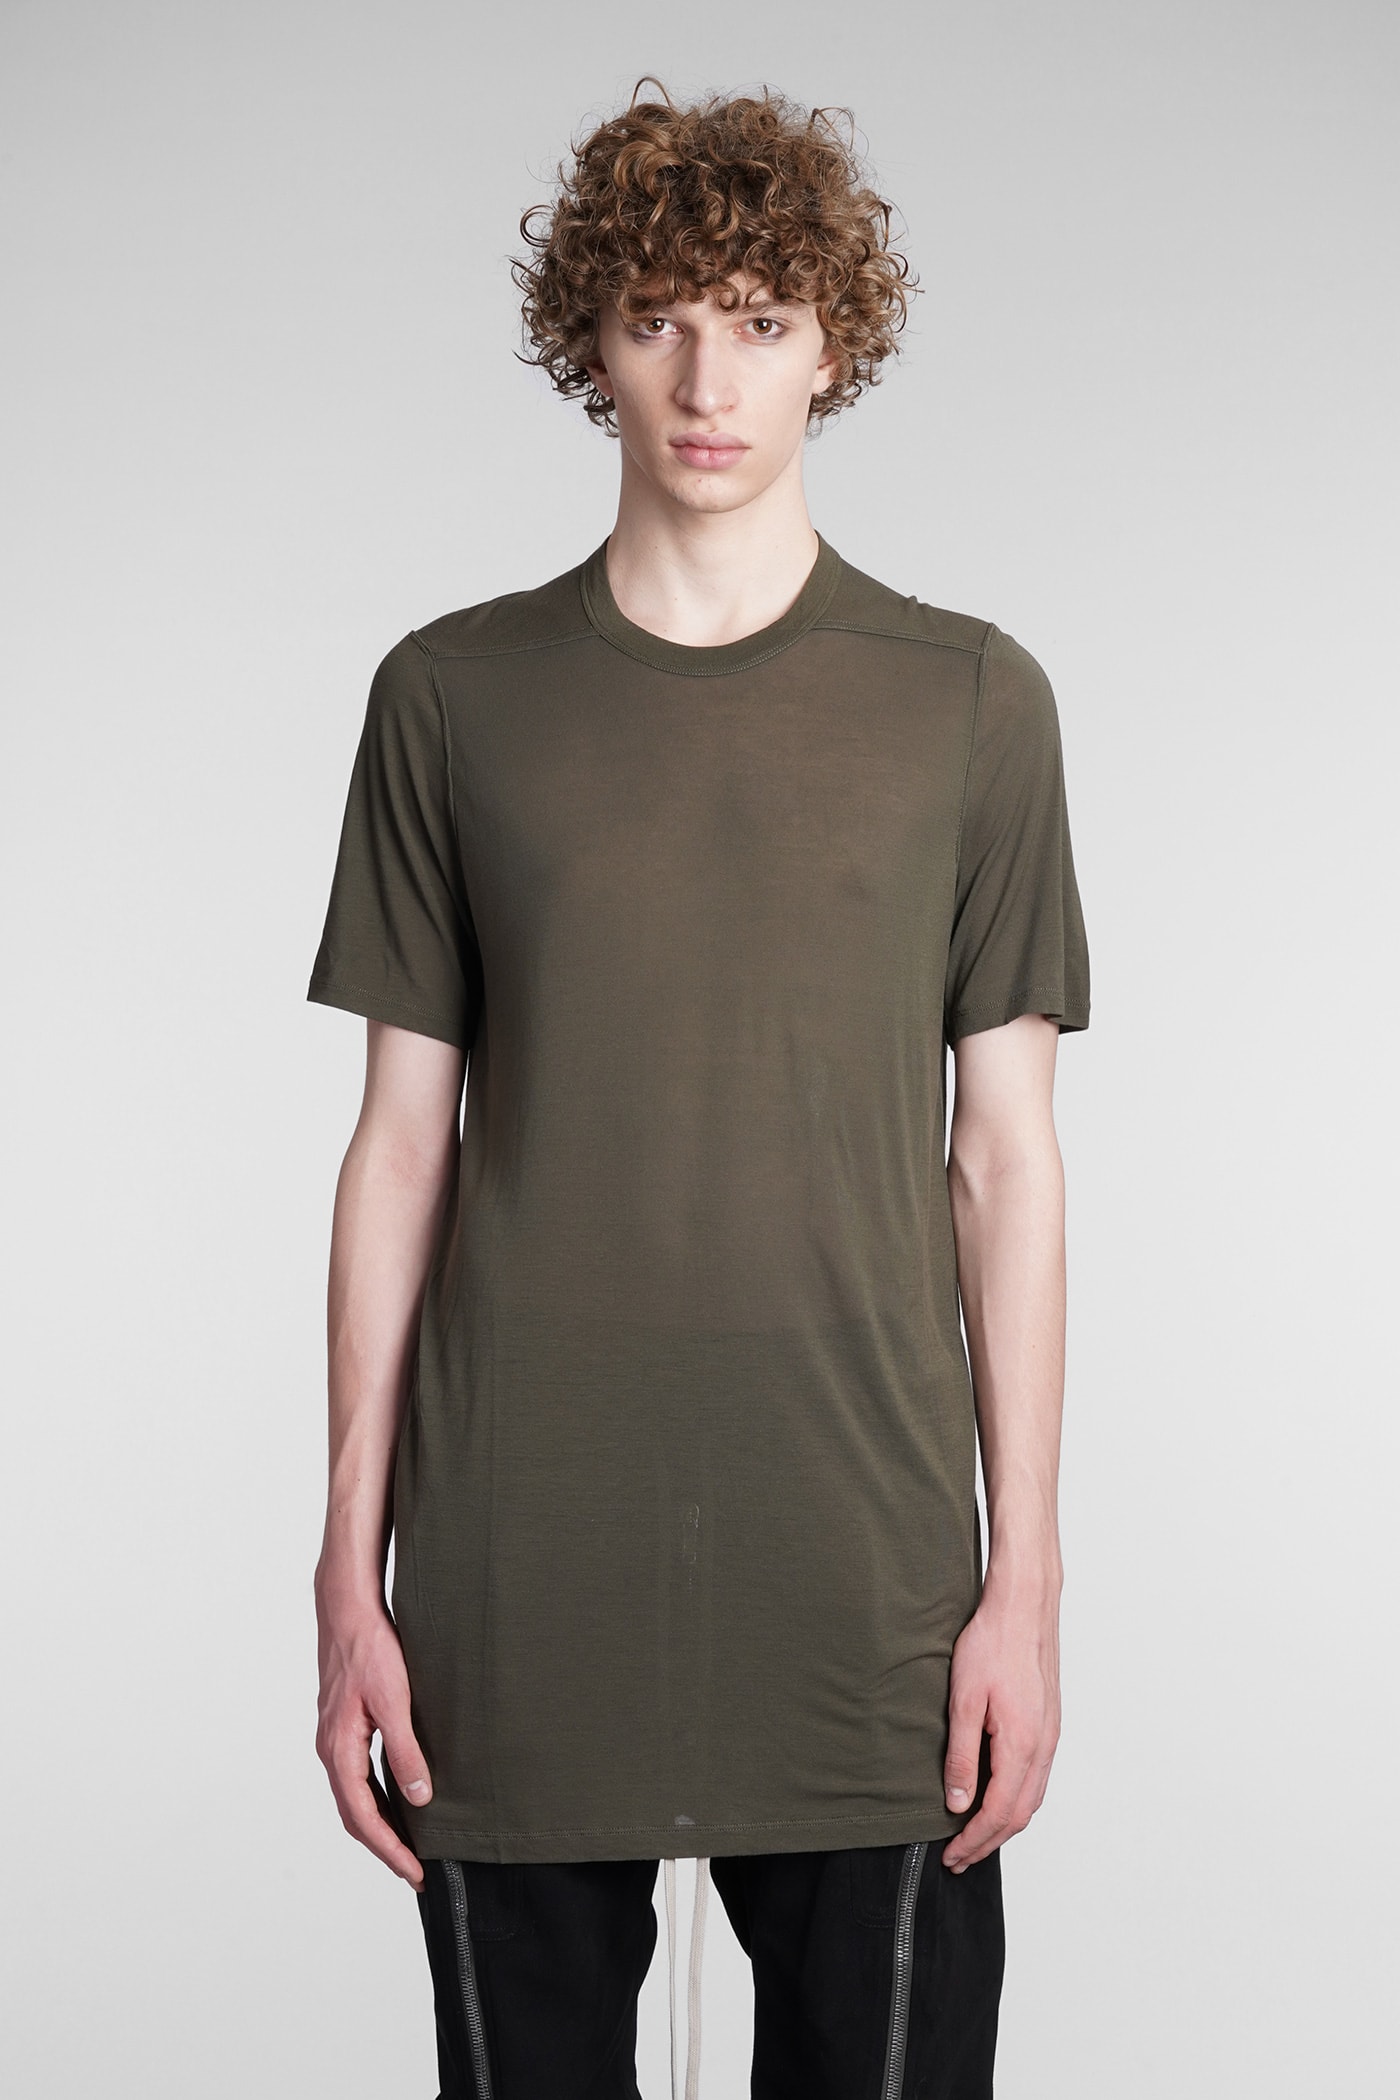 RICK OWENS T-SHIRT IN GREEN COTTON